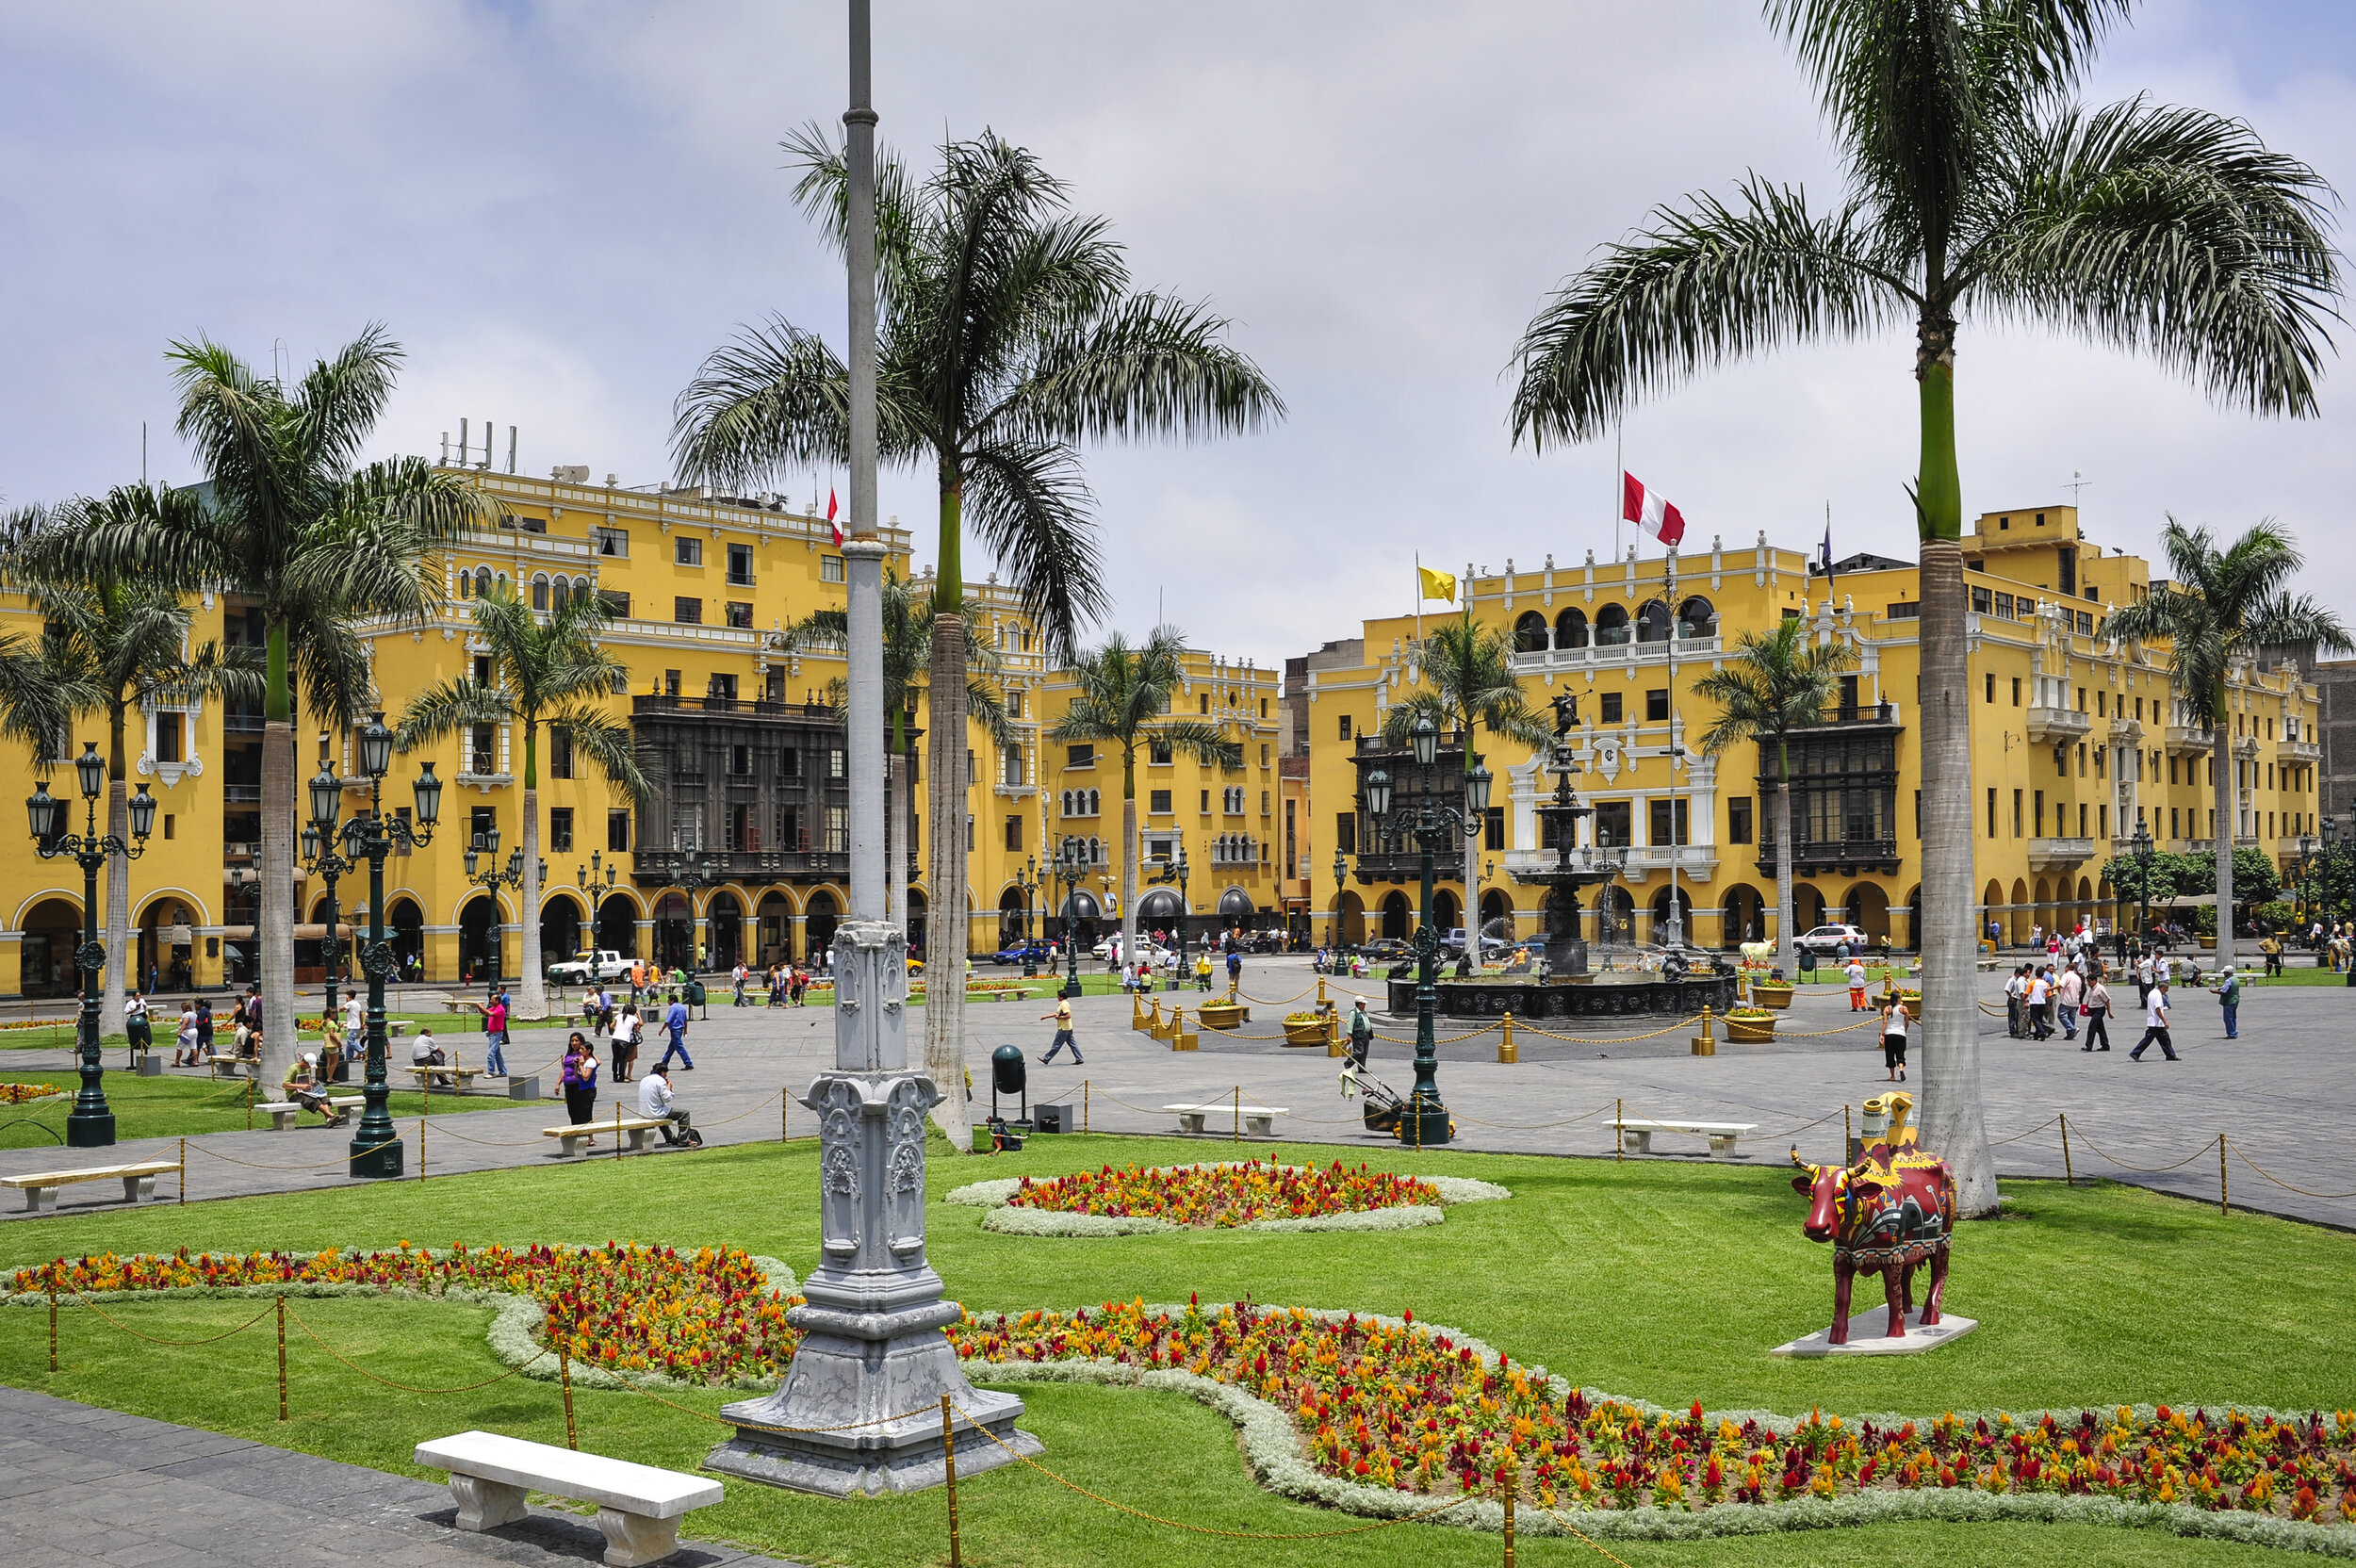 2) City tour of colonial Lima